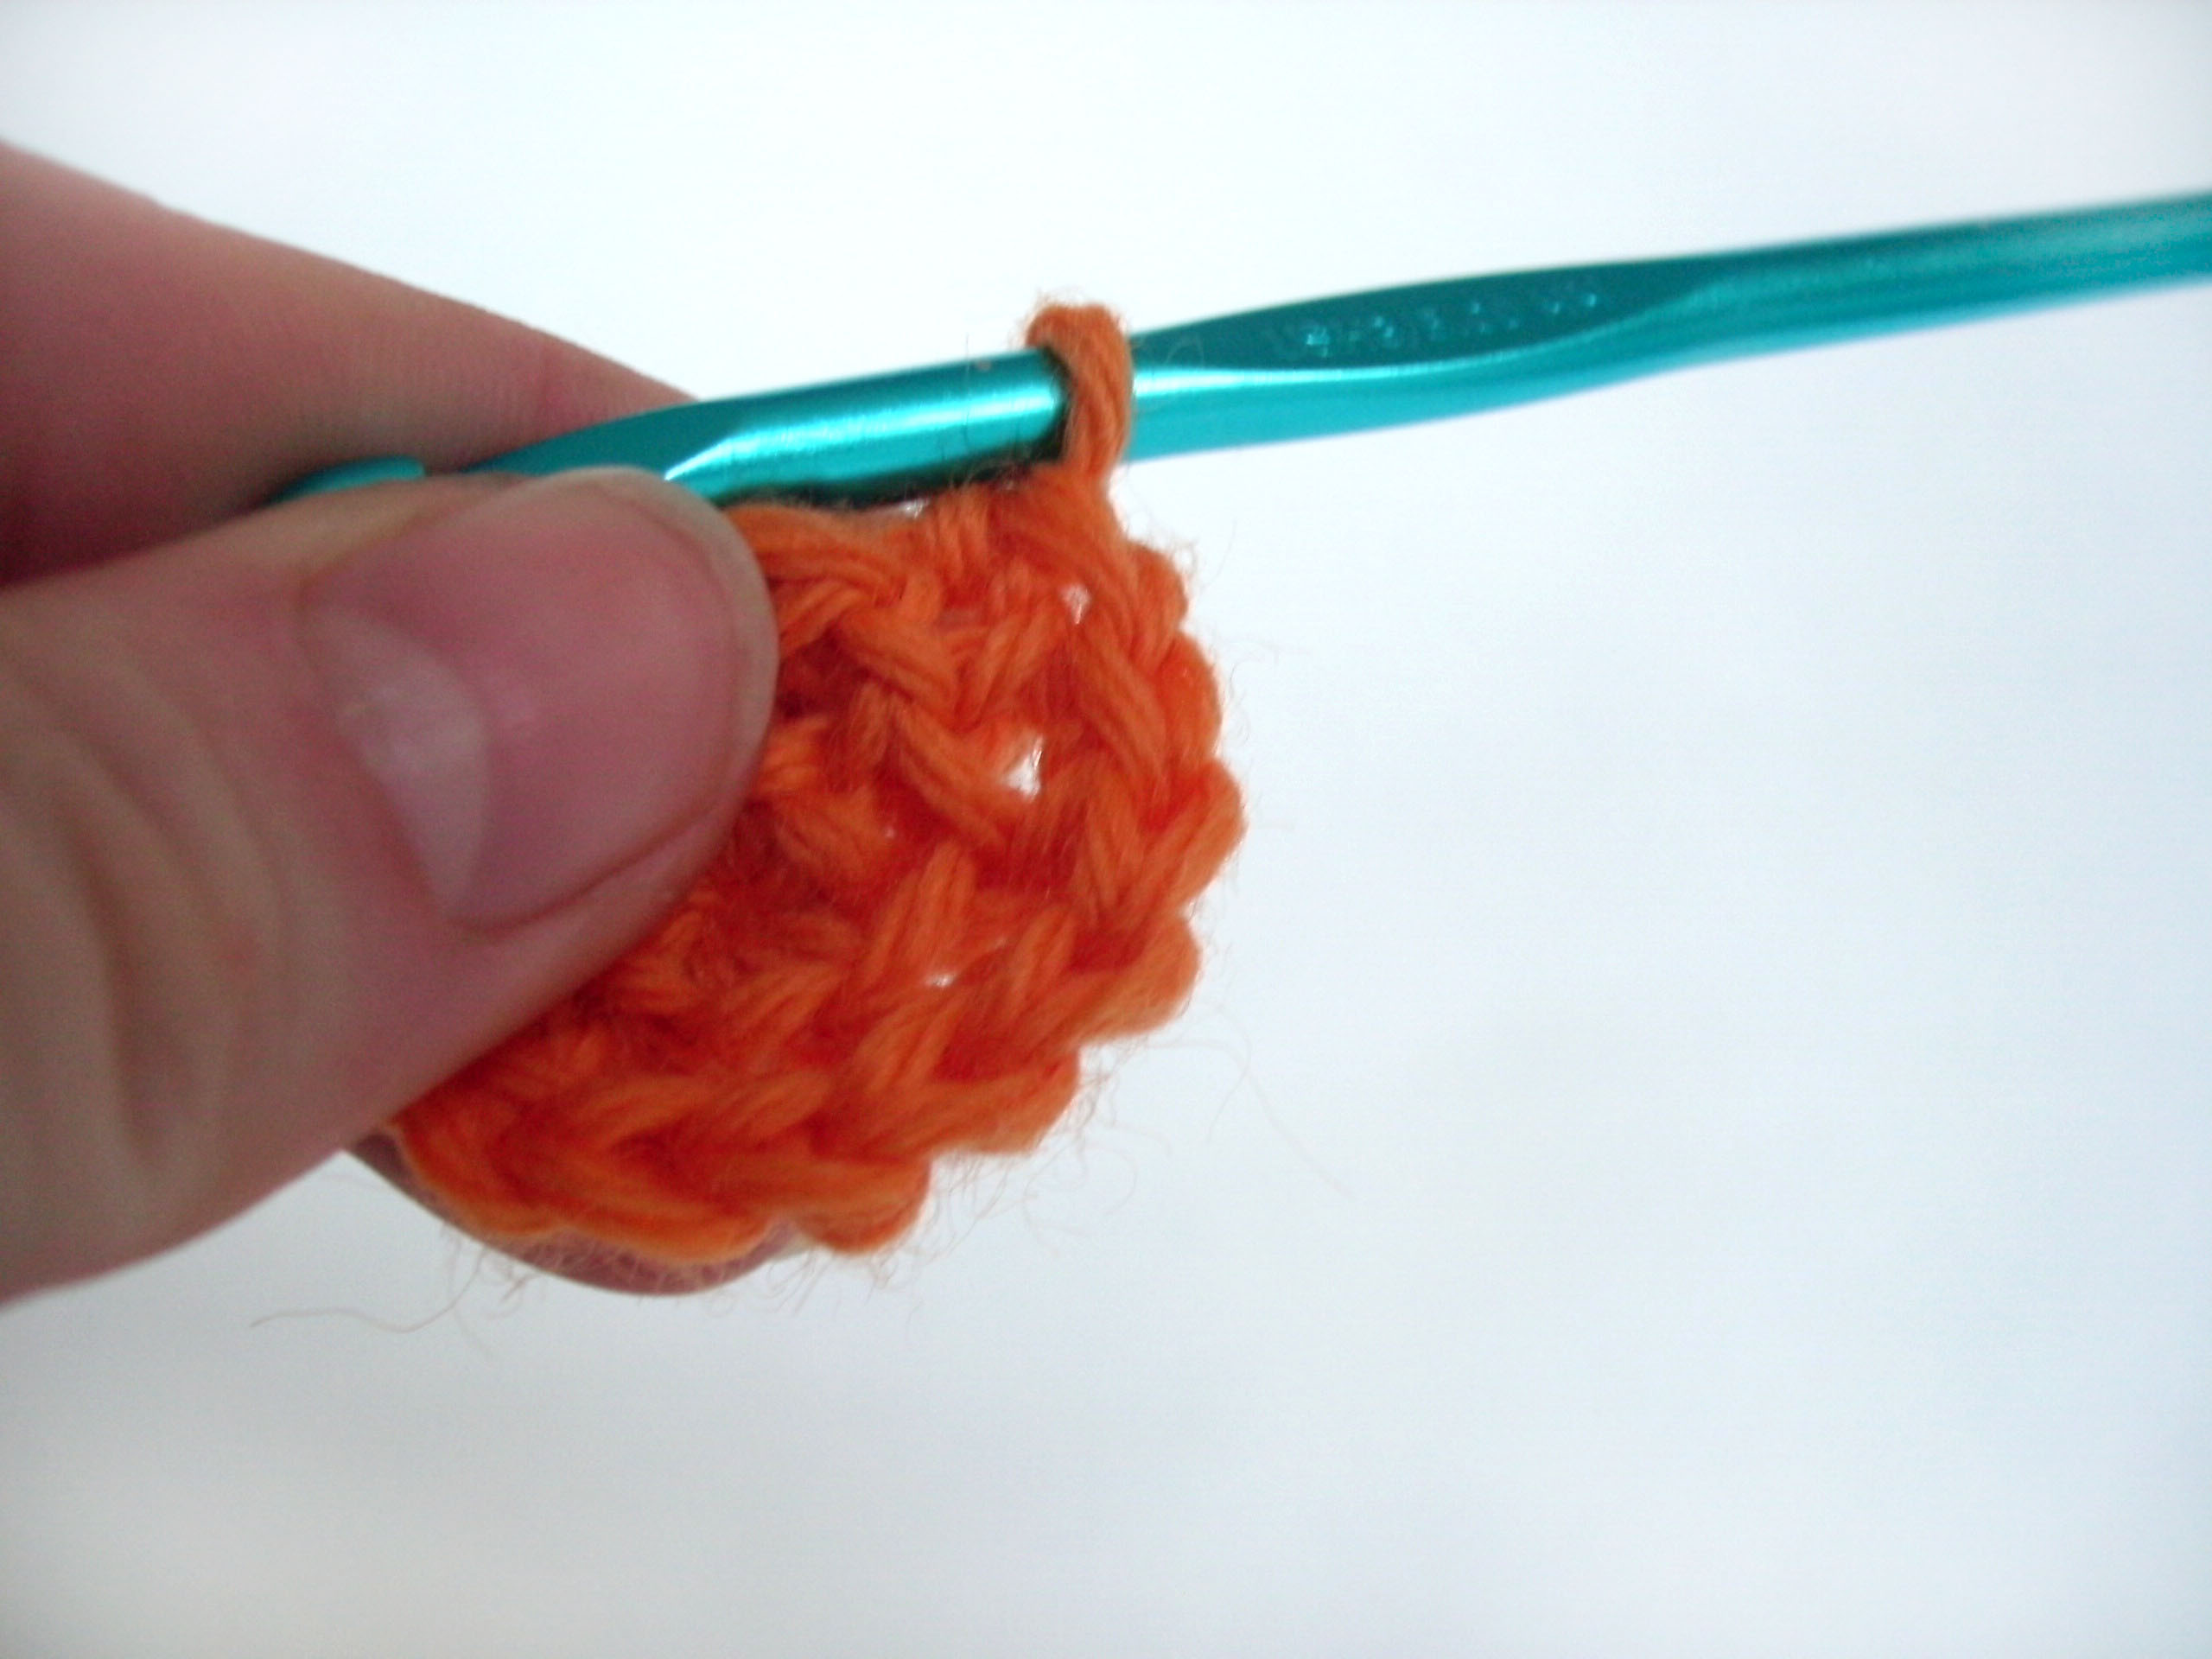 How to Calculate Yarn Length from Weight - Shiny Happy World